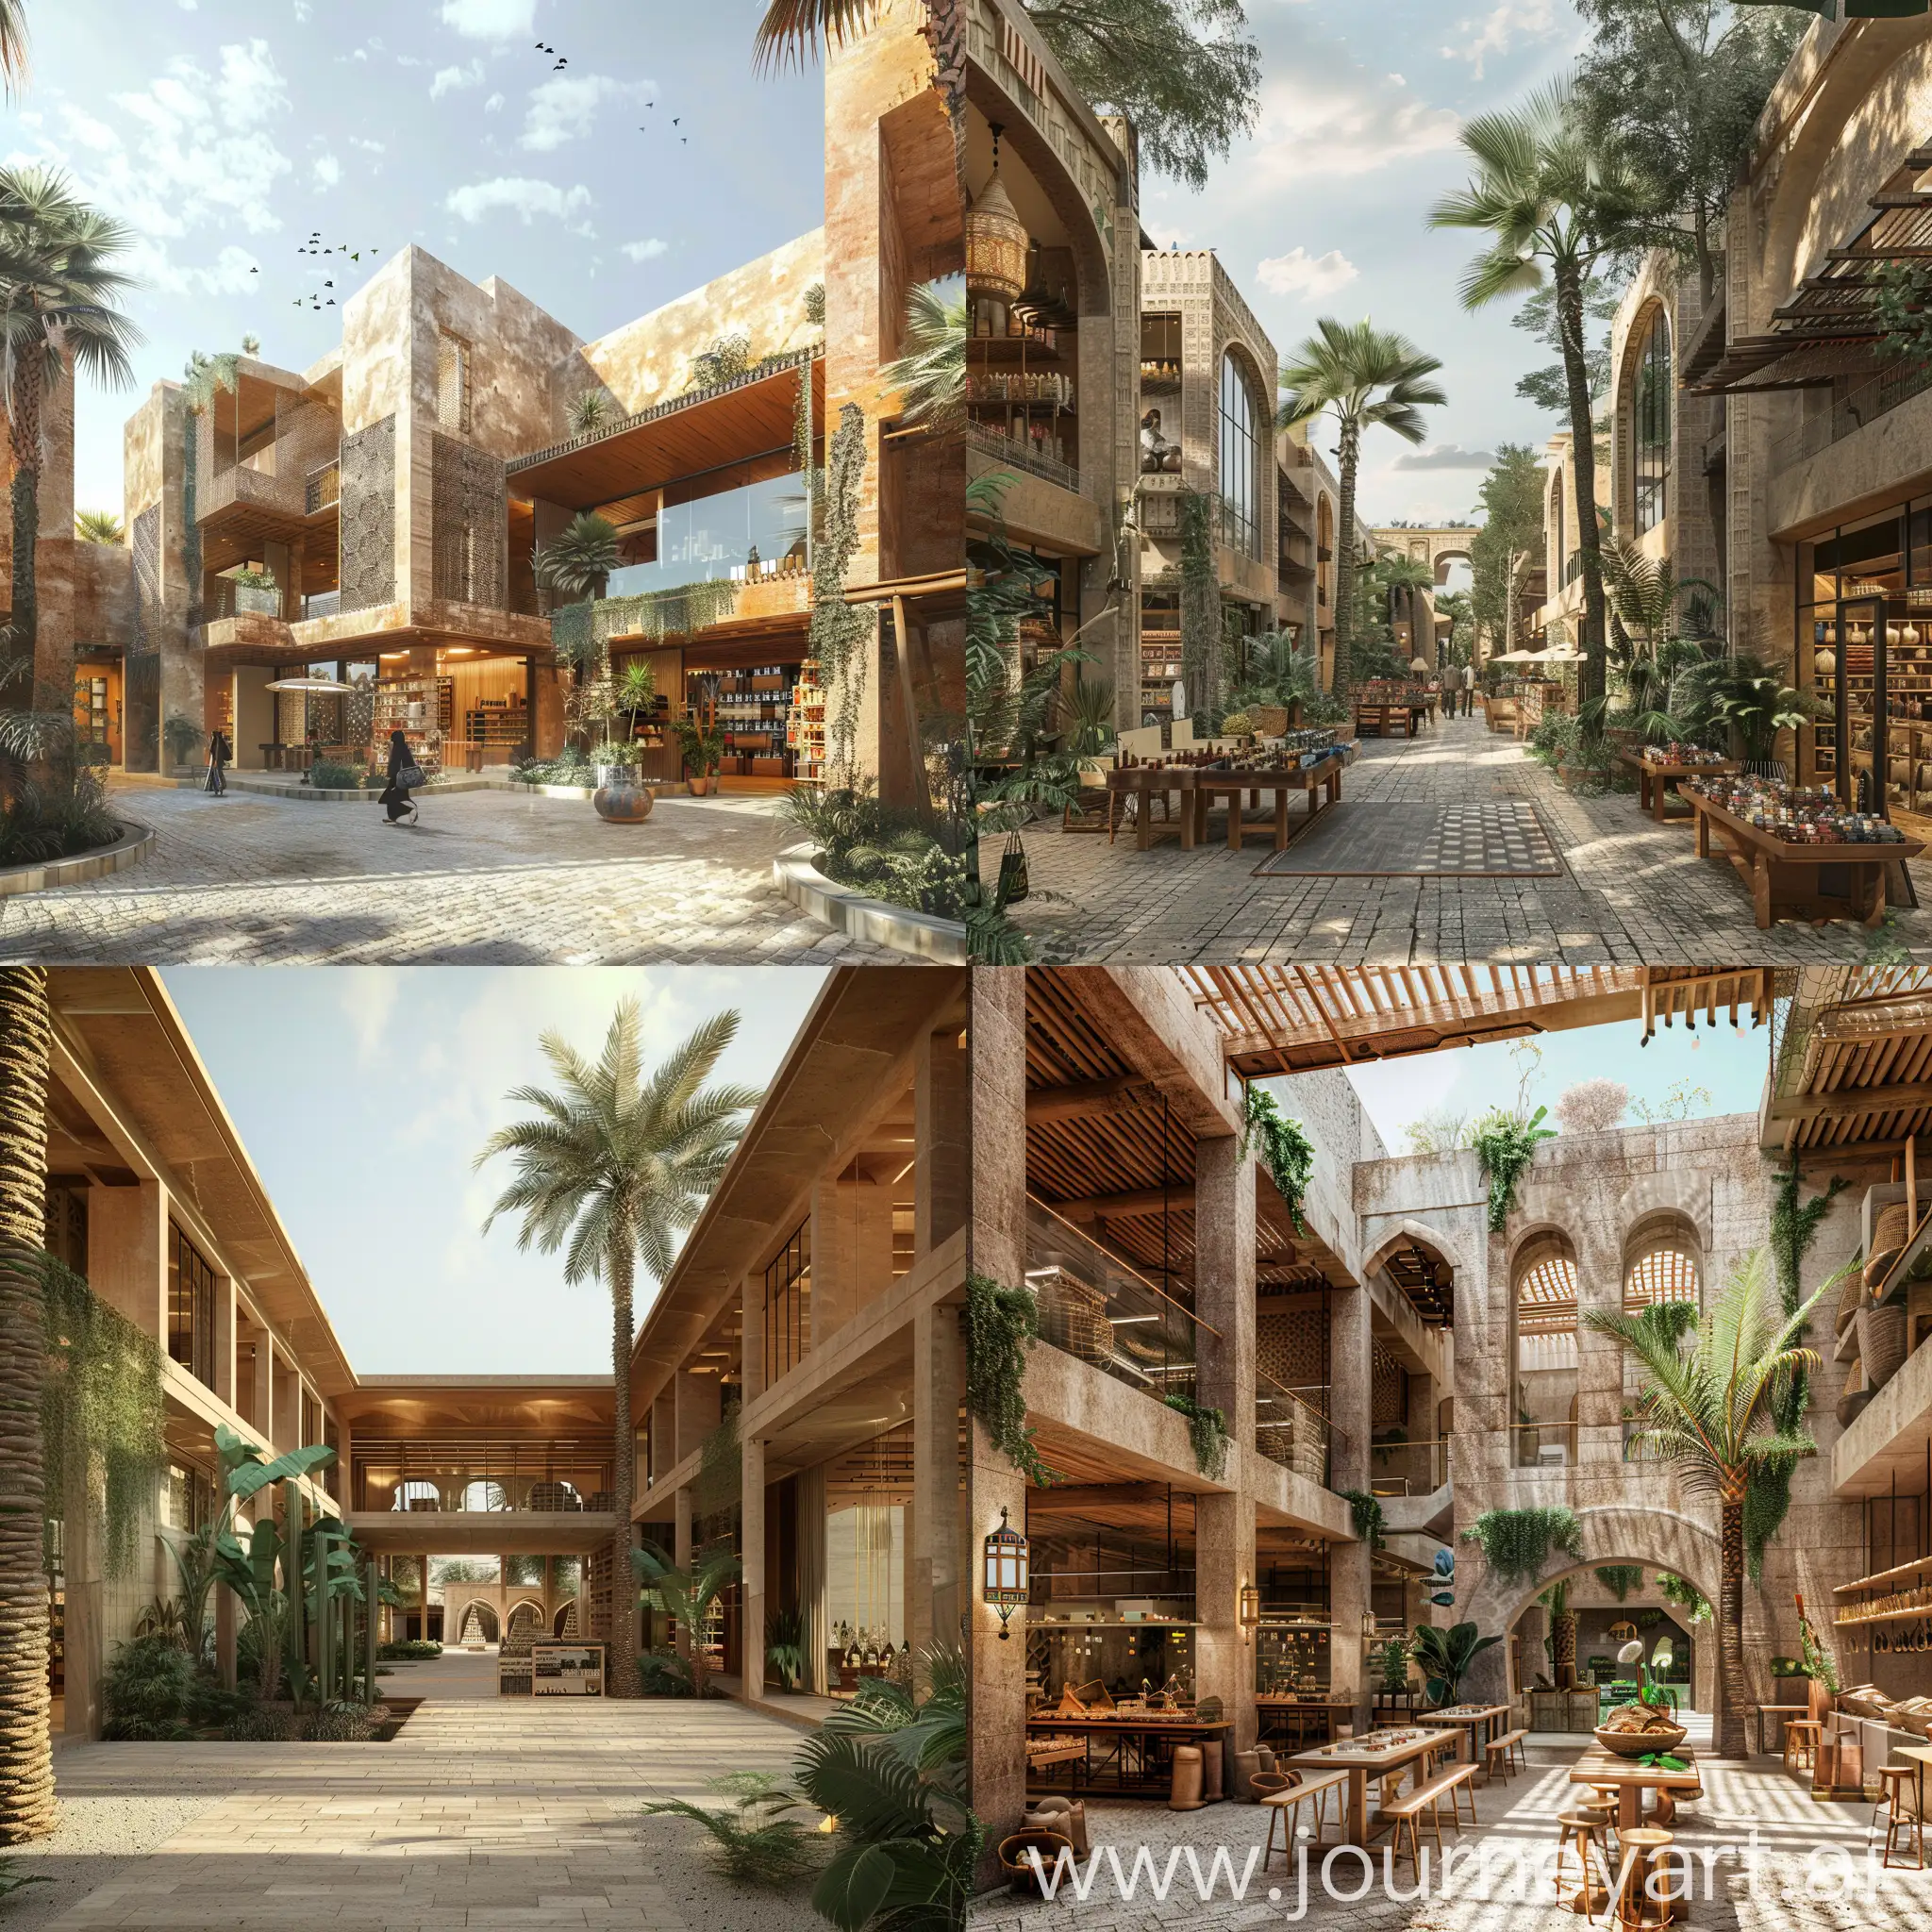 A heritage and commercial complex for selling handmade products, built in Egypt from local materials and affiliated with green and modern architecture.